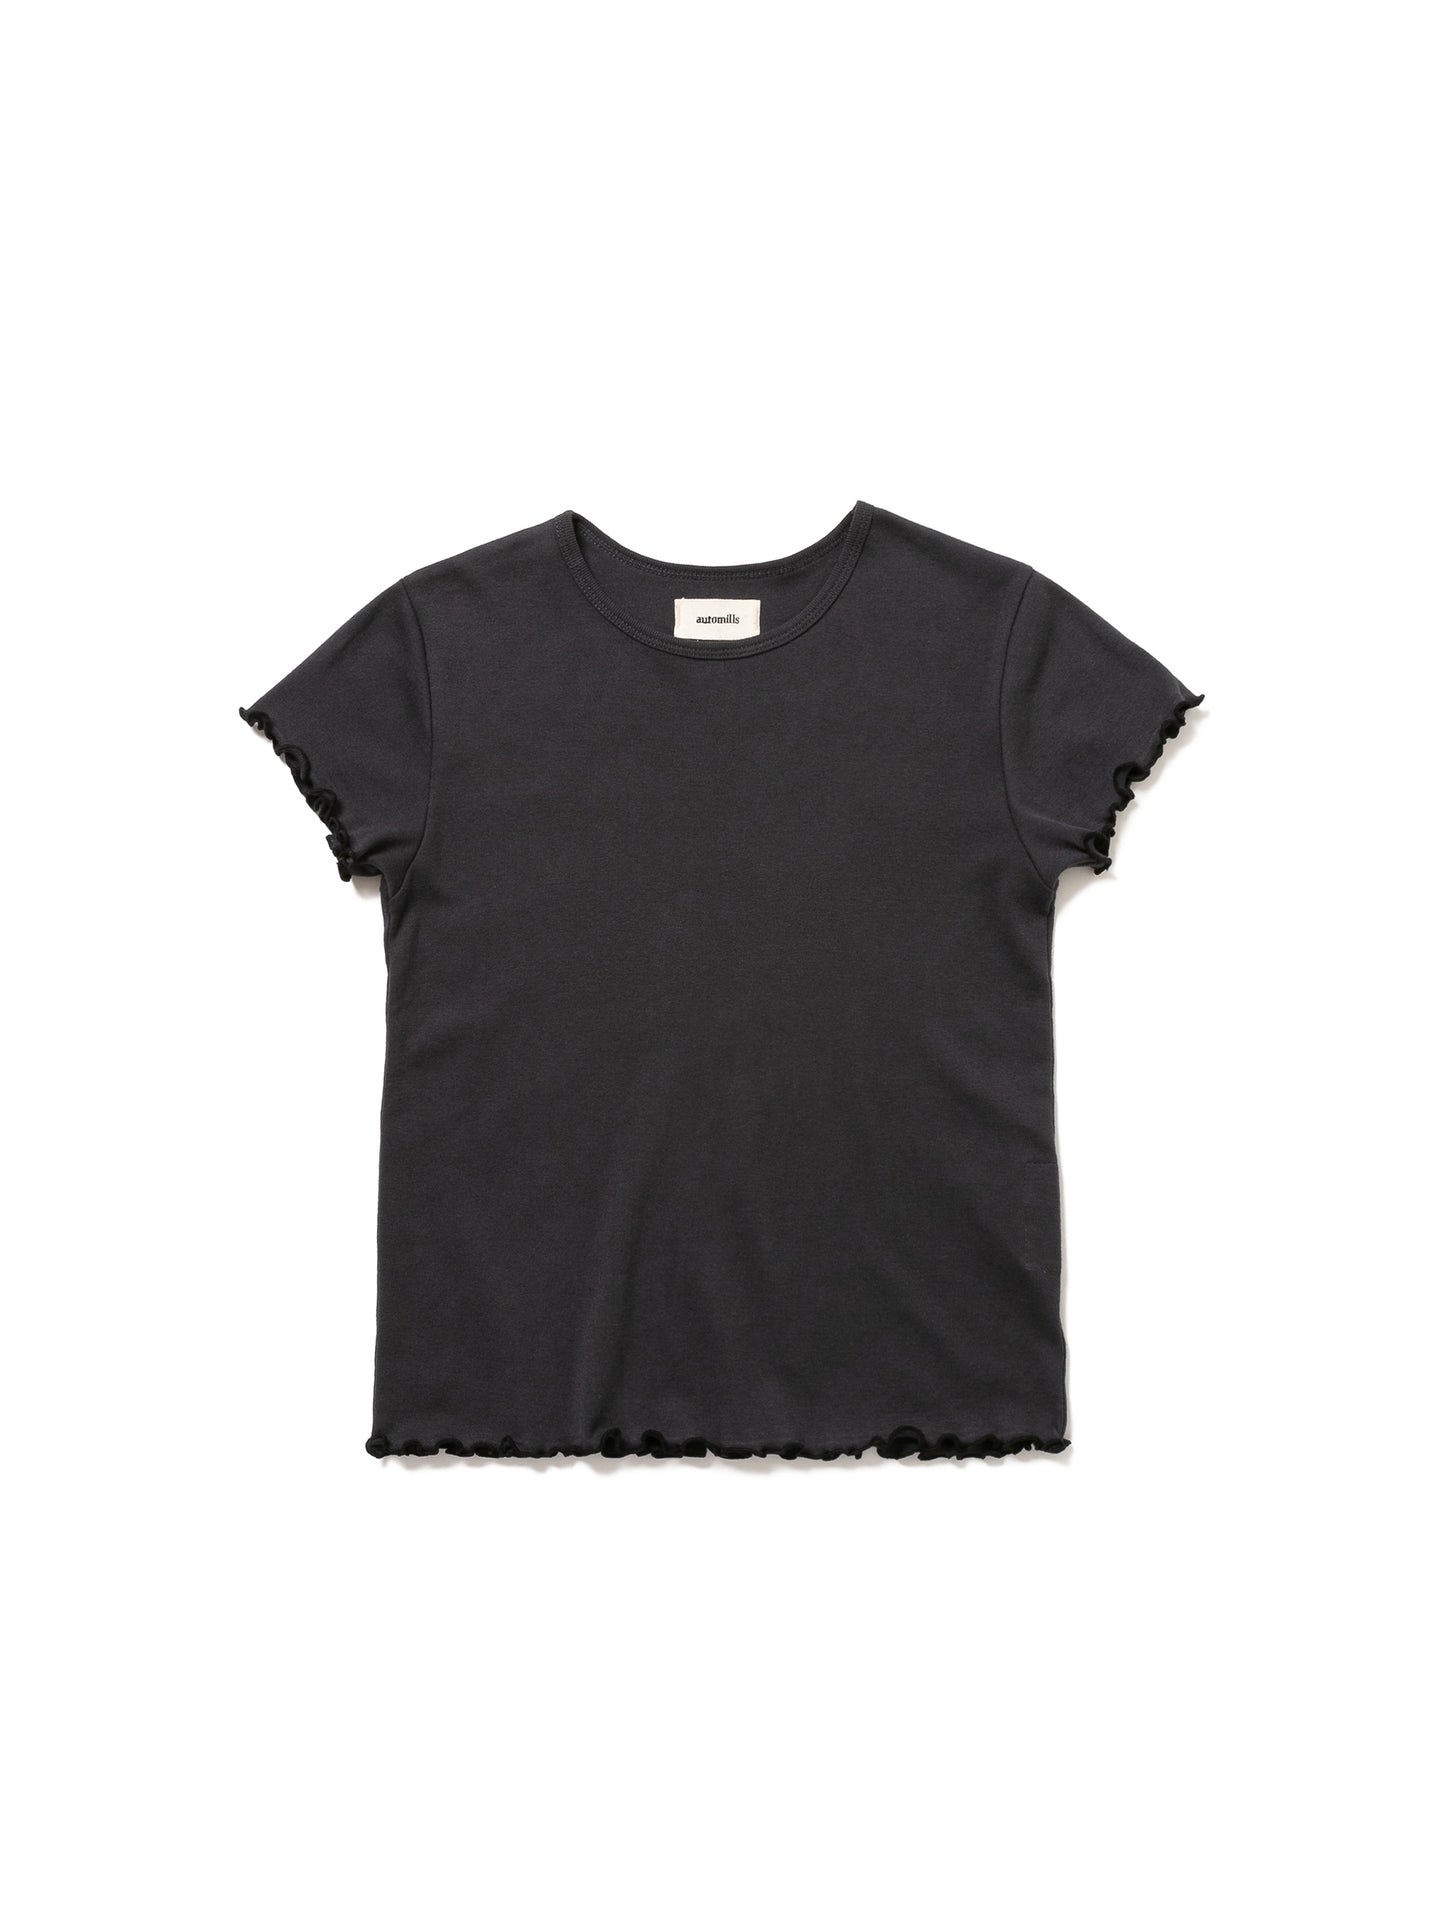 LOVER S/S TEE ORGANIC COTTON STRETCH JERSEY AM-C0011 Charcoal